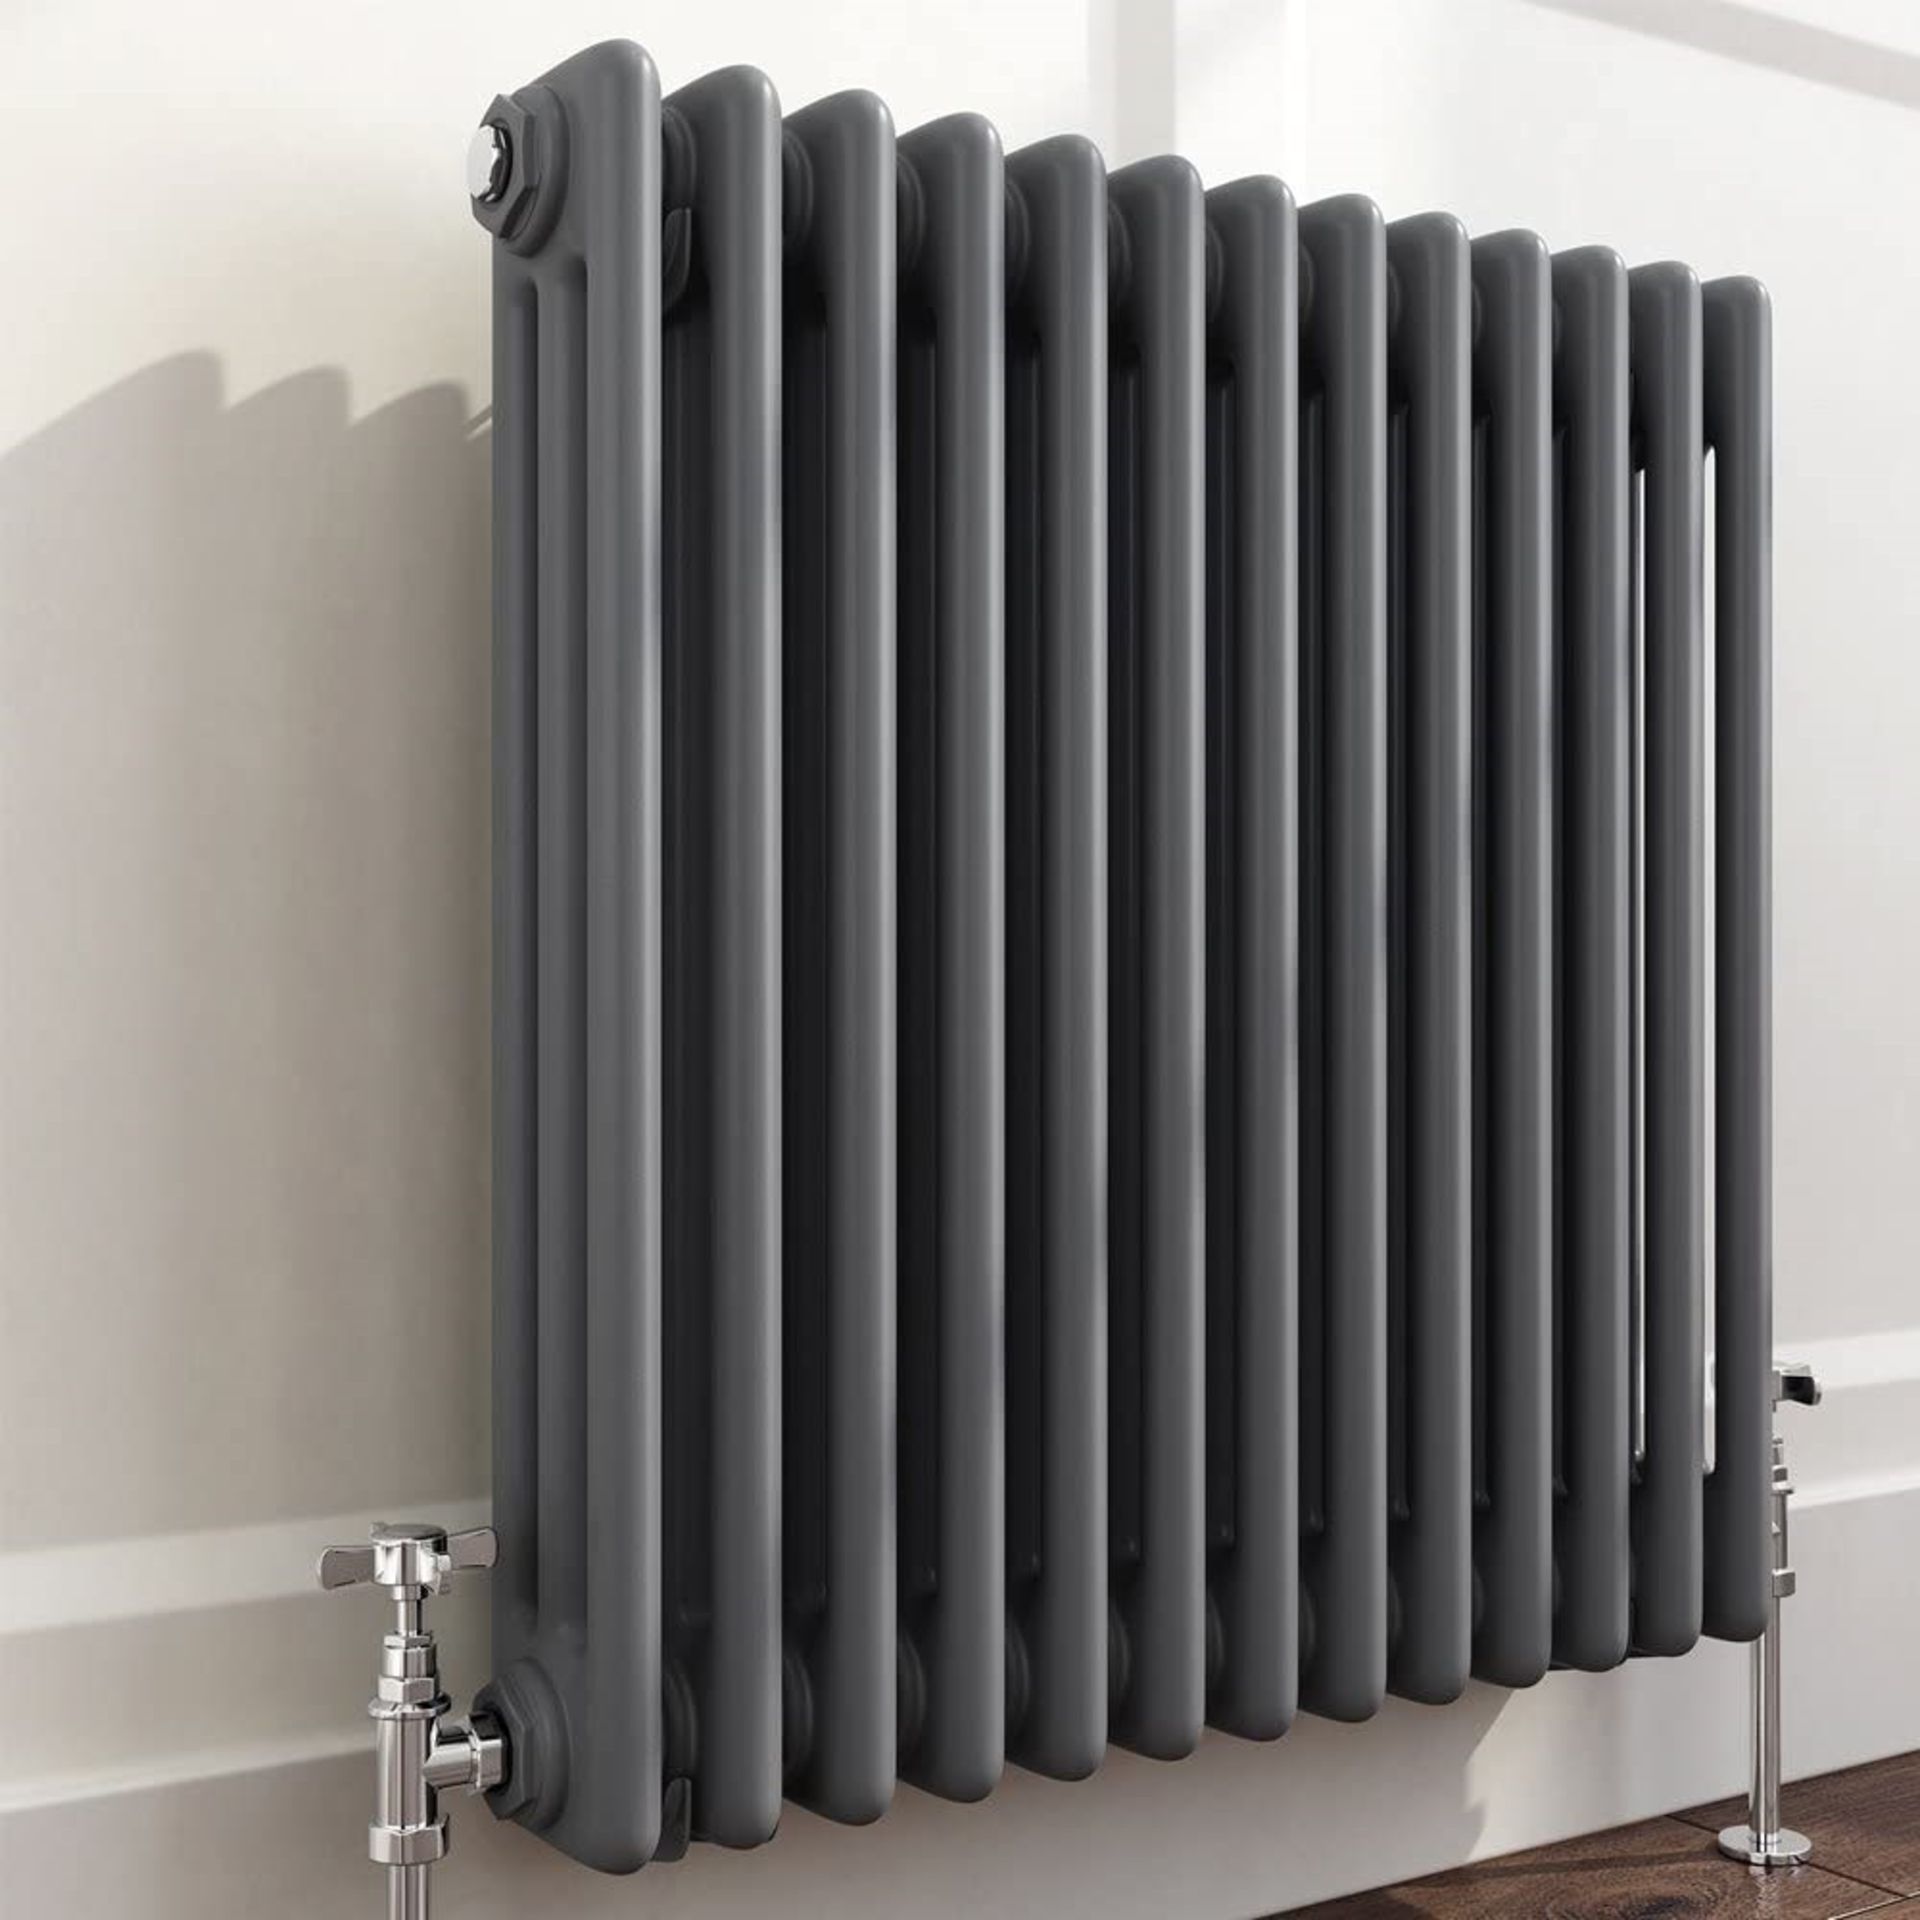 BRAND NEW BOXED 600x600mm Anthracite Double Panel Horizontal Colosseum Traditional Radiator. R...